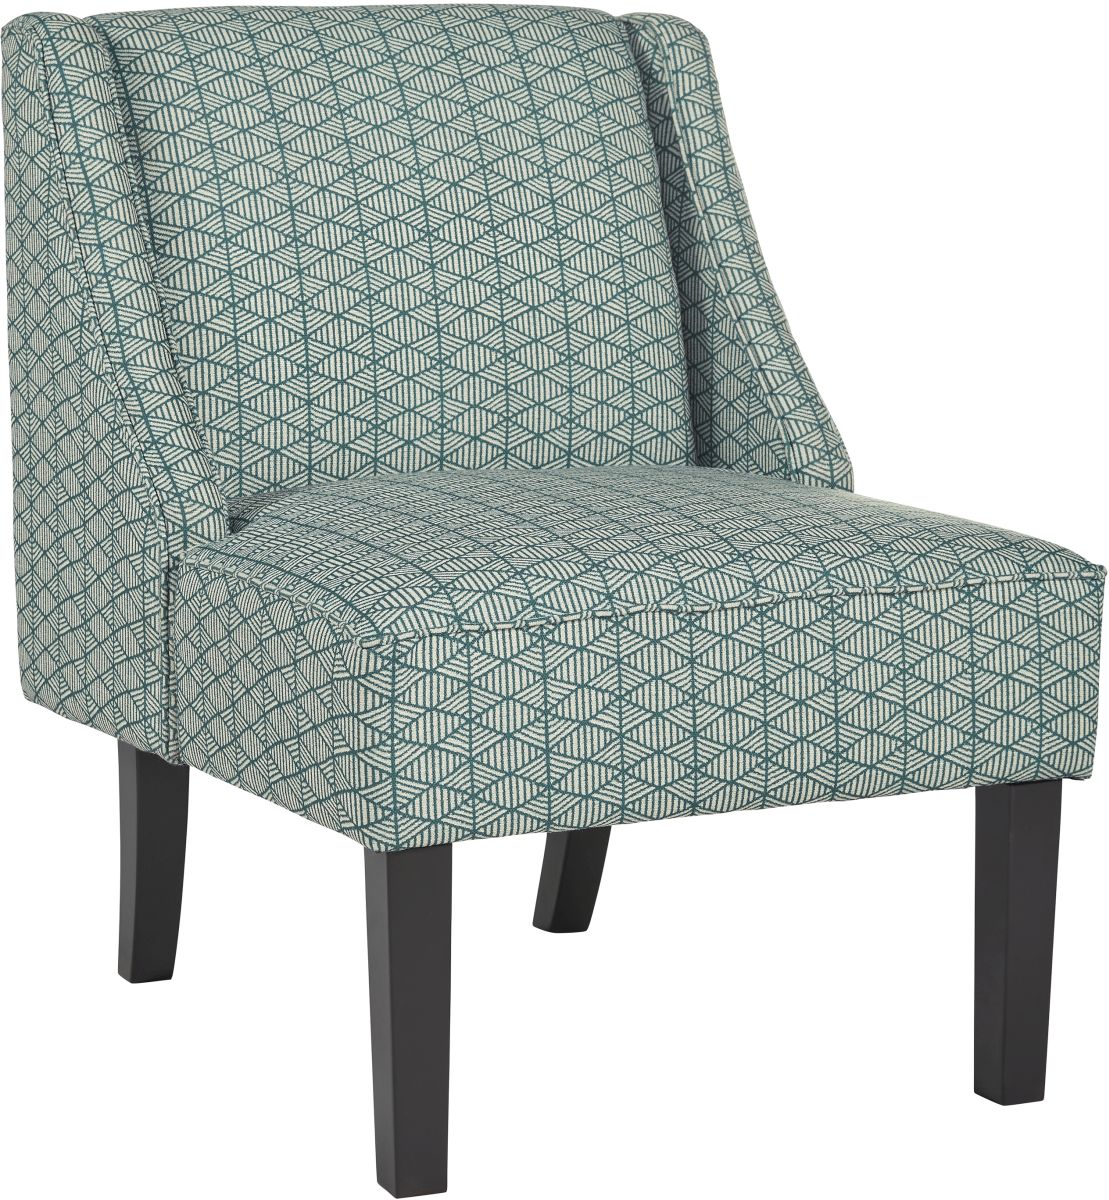 Signature Design by Ashley® Janesley Teal/Cream Accent Chair